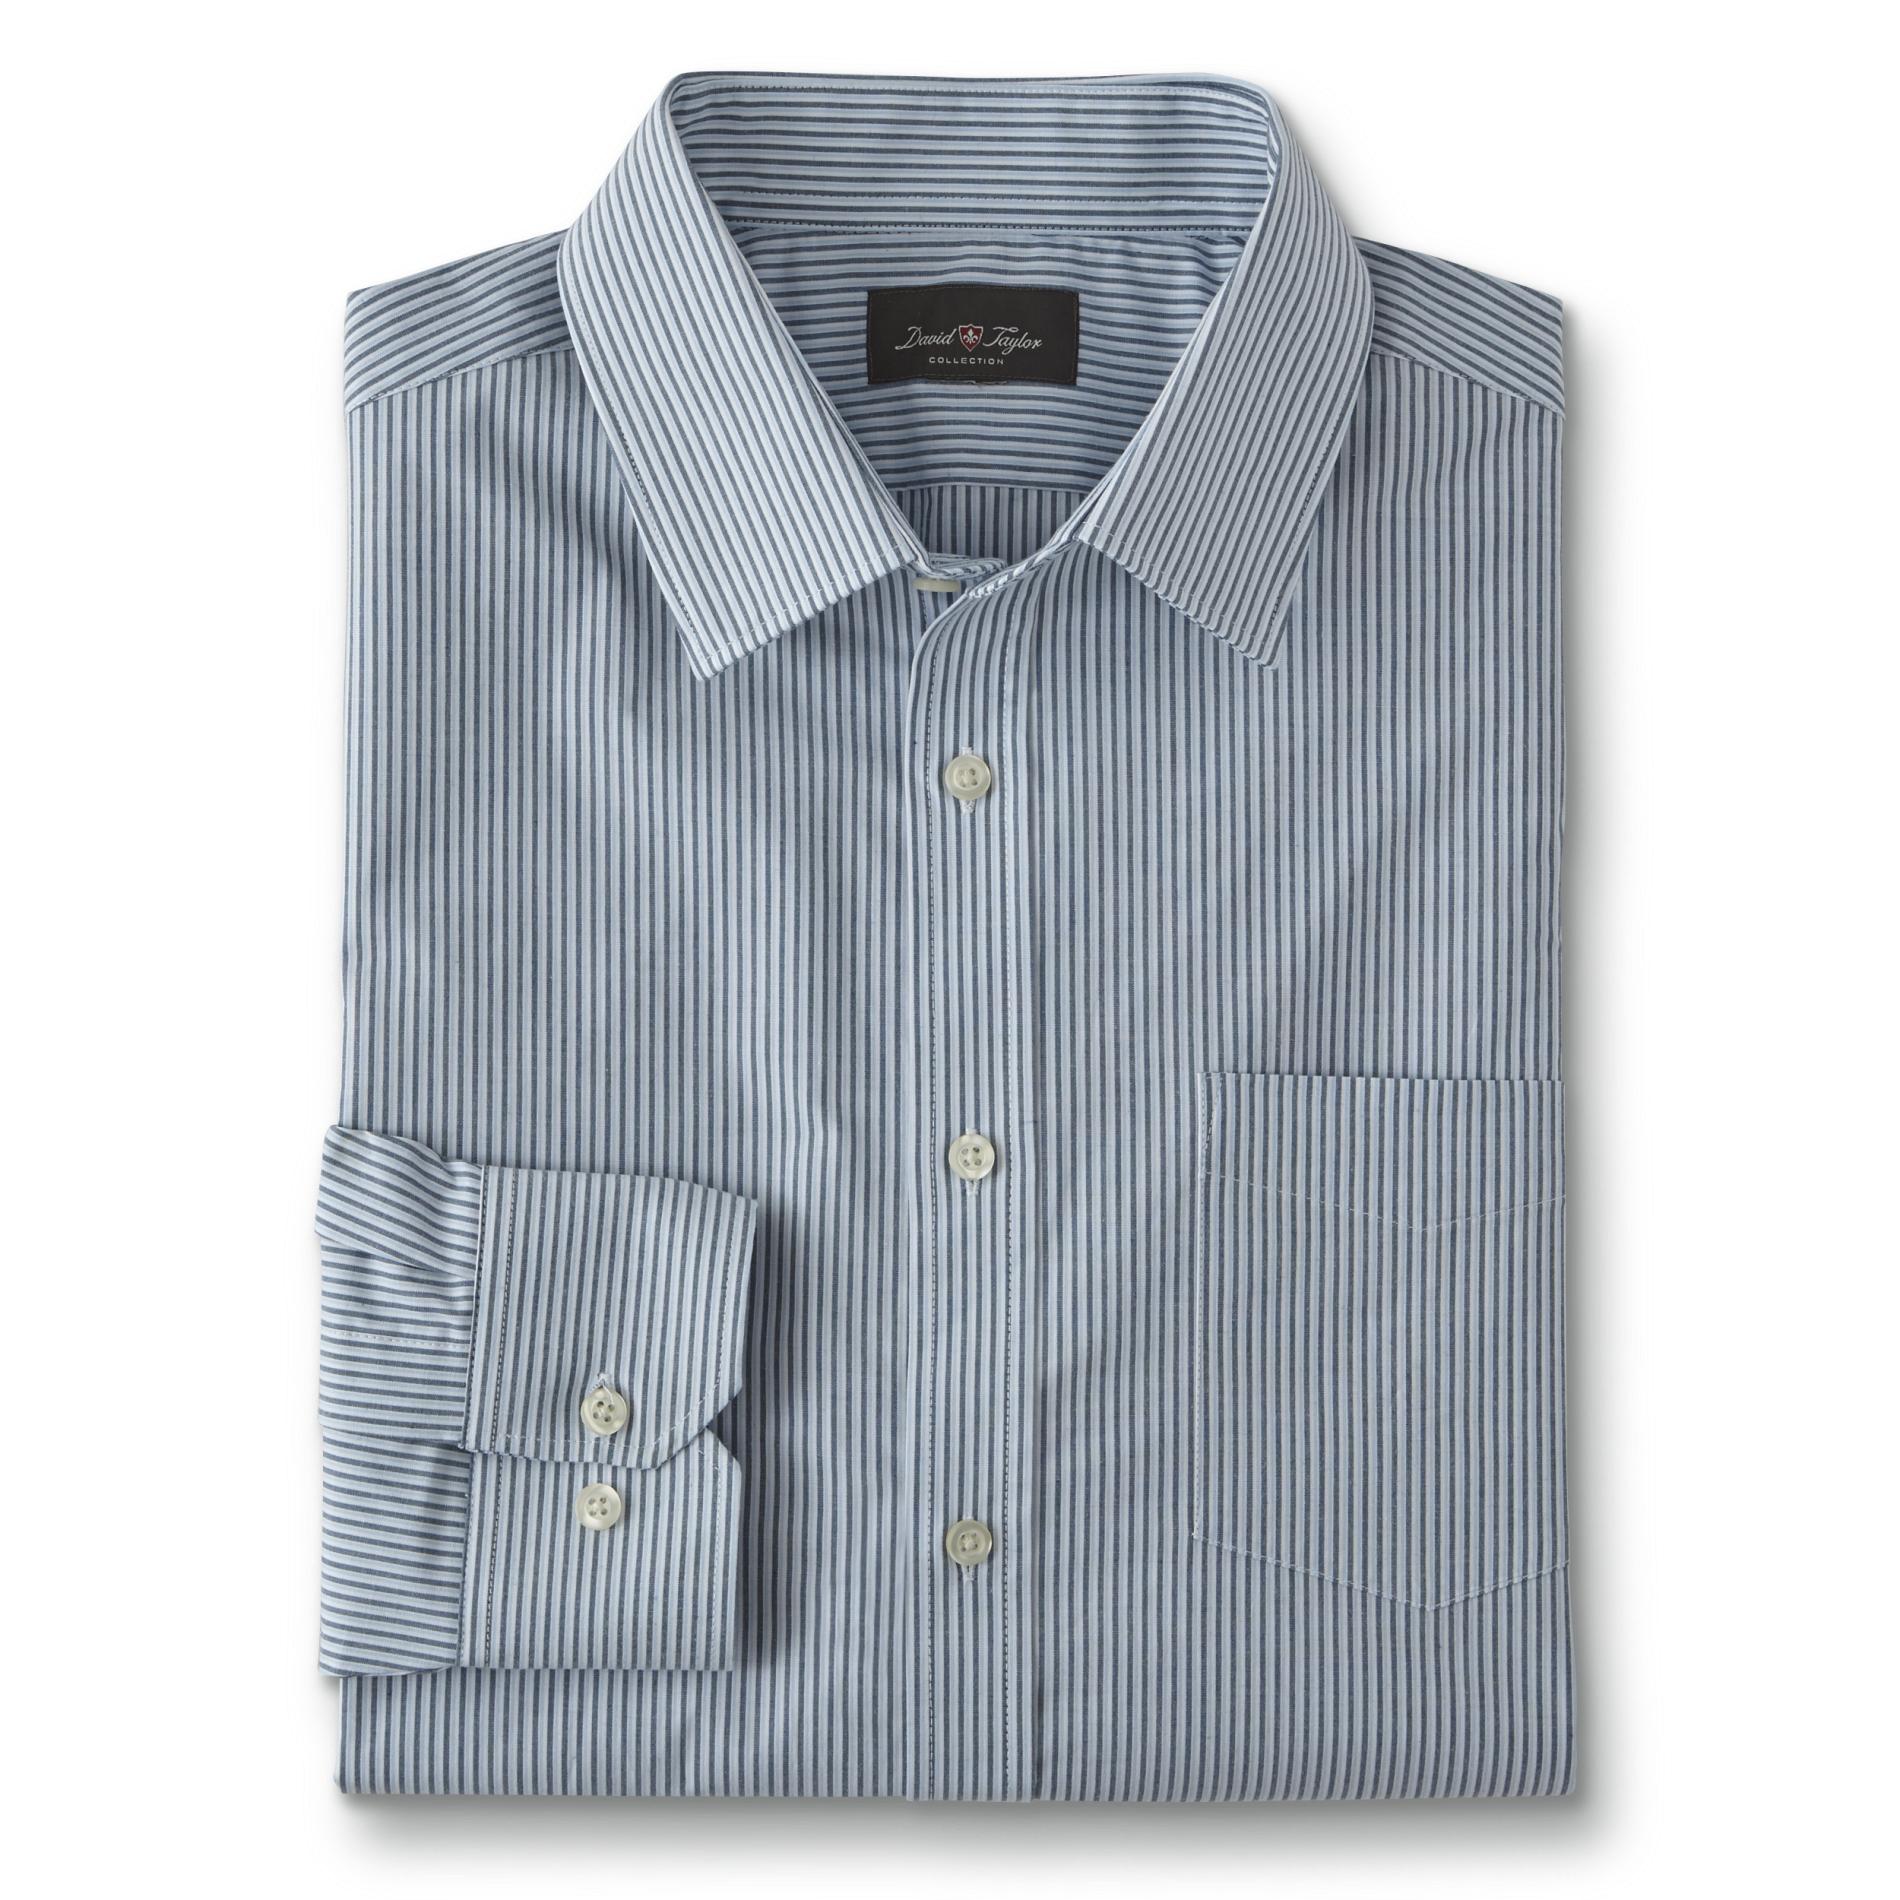 David Taylor Collection Men's Classic Fit Dress Shirt - Striped